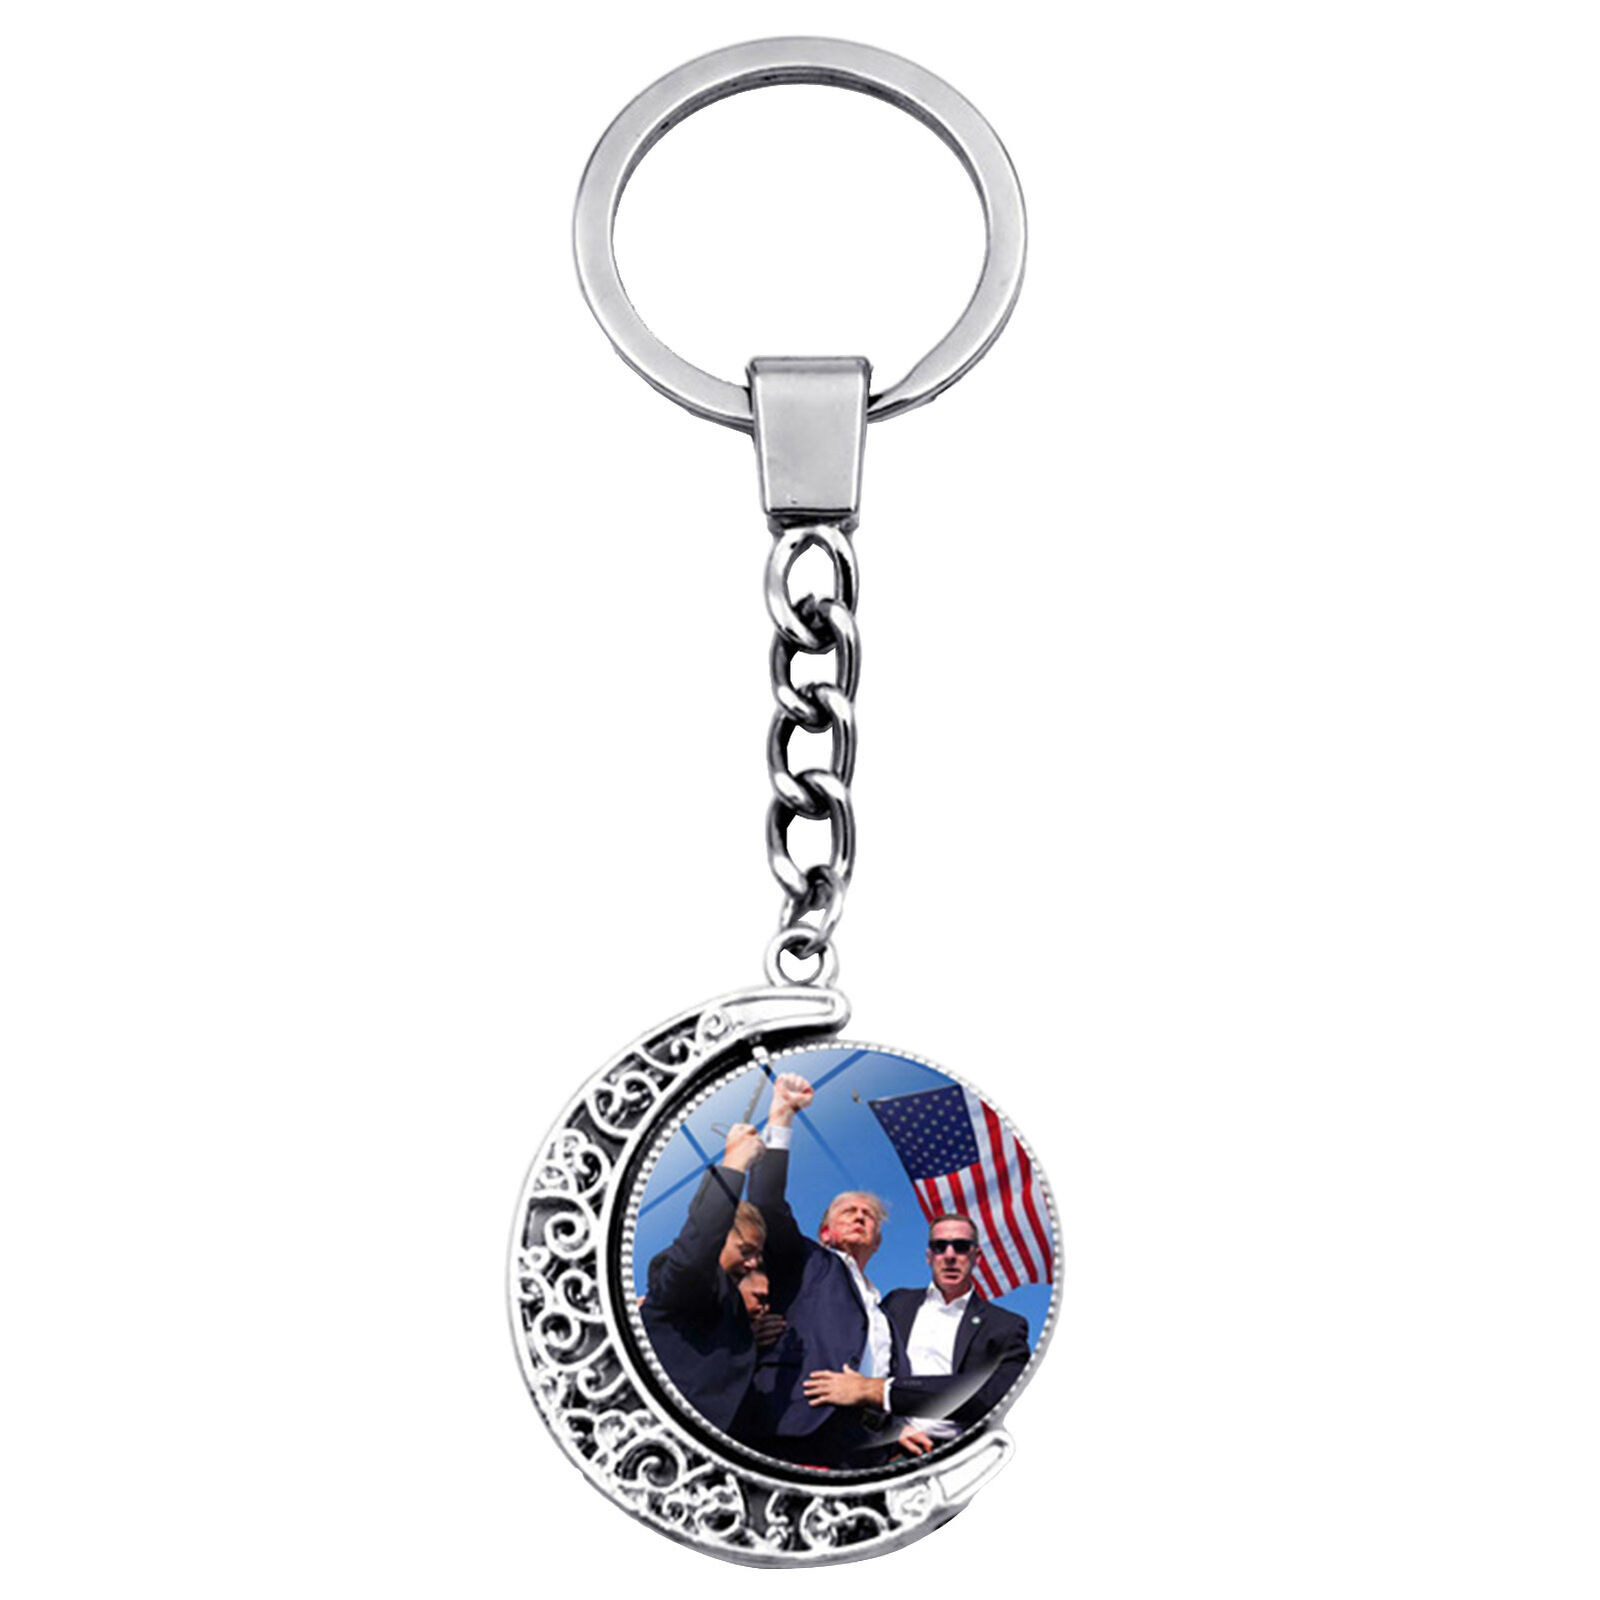 Trump Rally Shooter Keychain USA Freedom Trump Survived Keychain Key Ring Gift